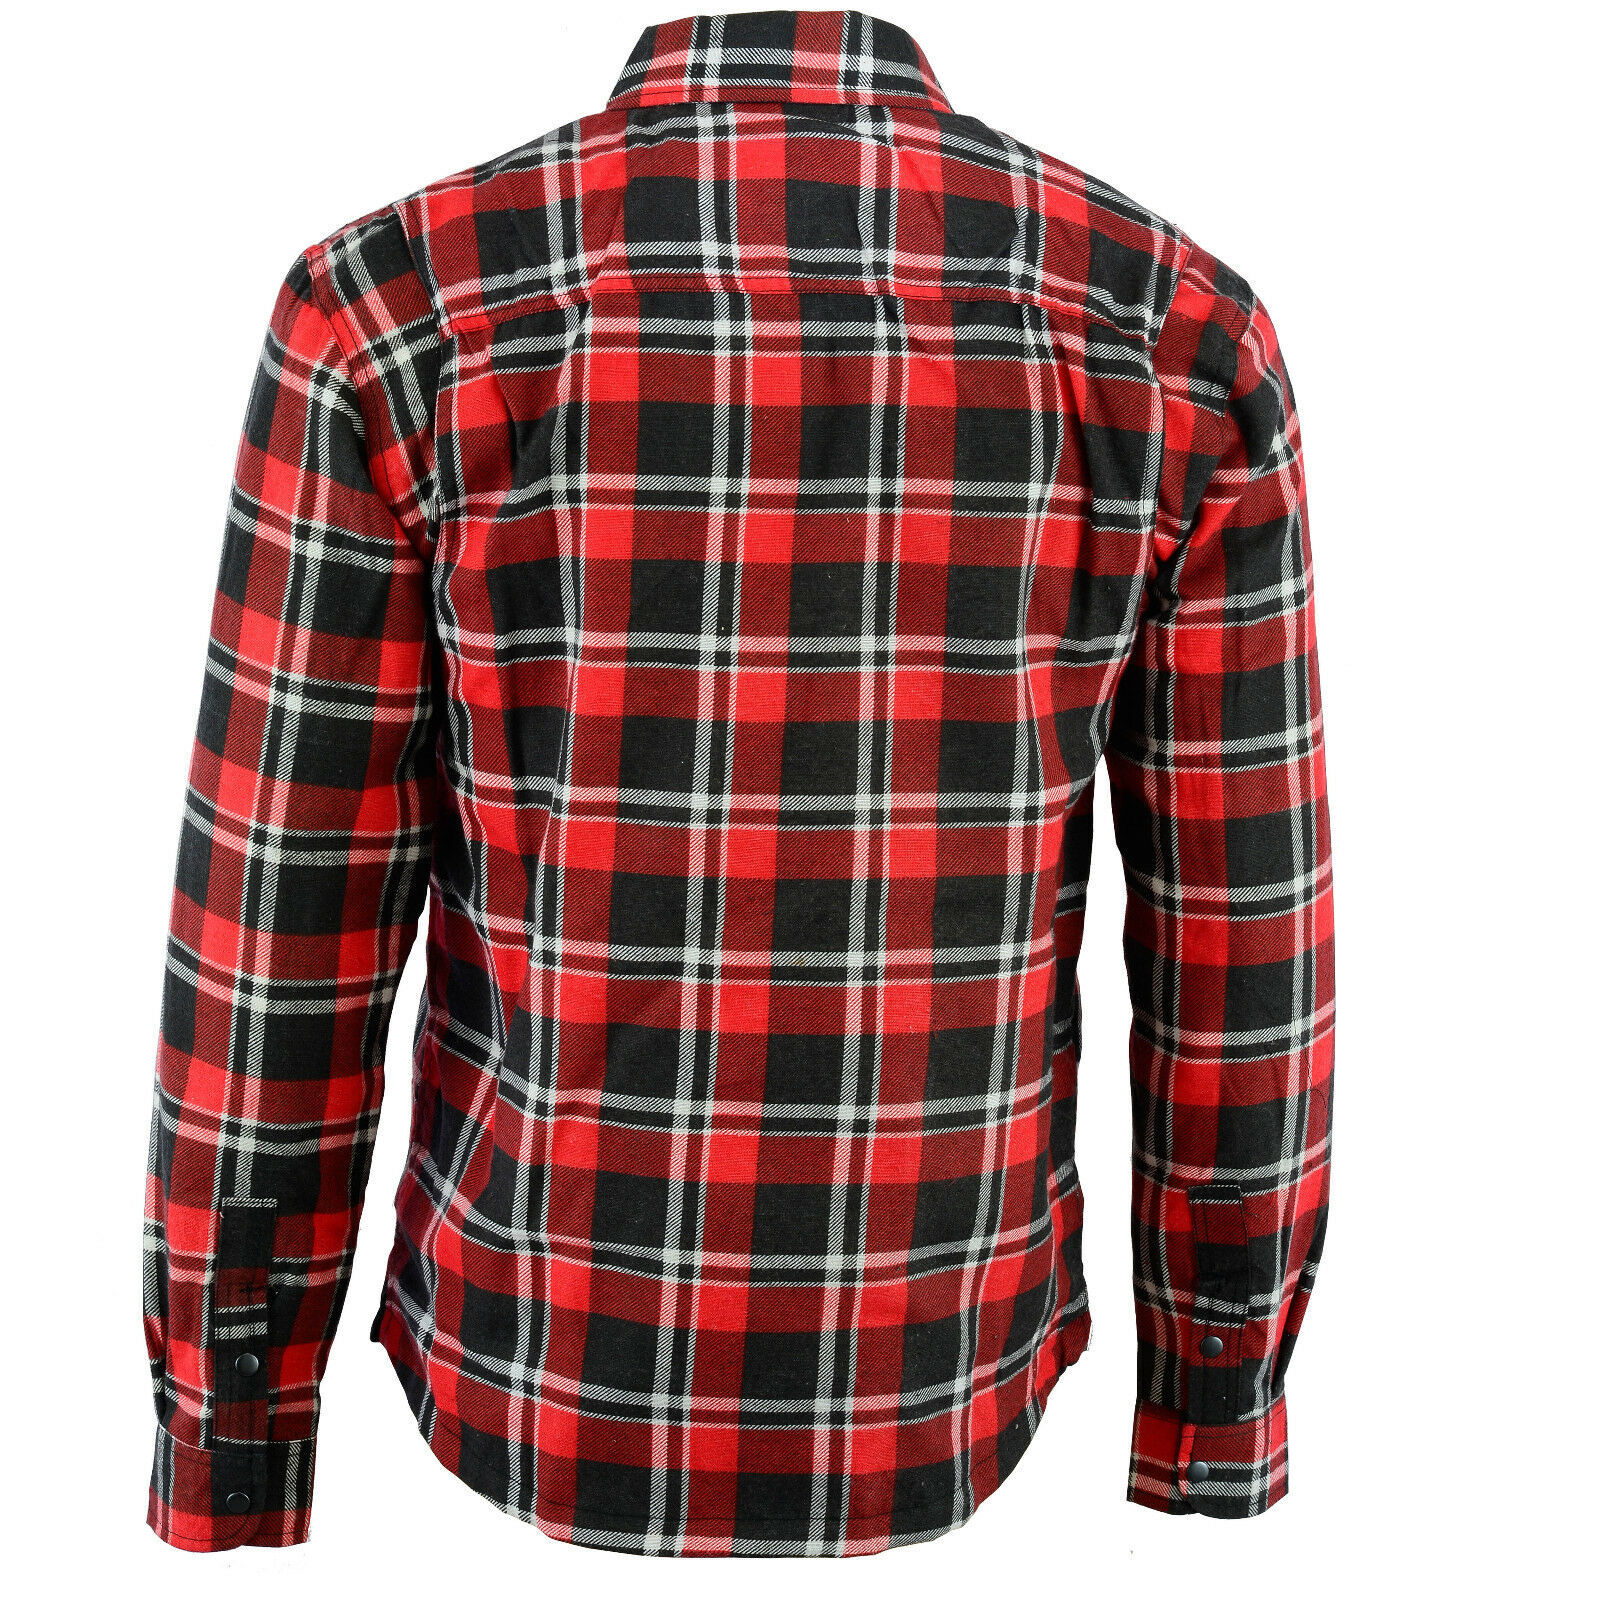 New Bikers Gear Kevlar® Lined Flannel Motorcycle Shirt Red Black White ...